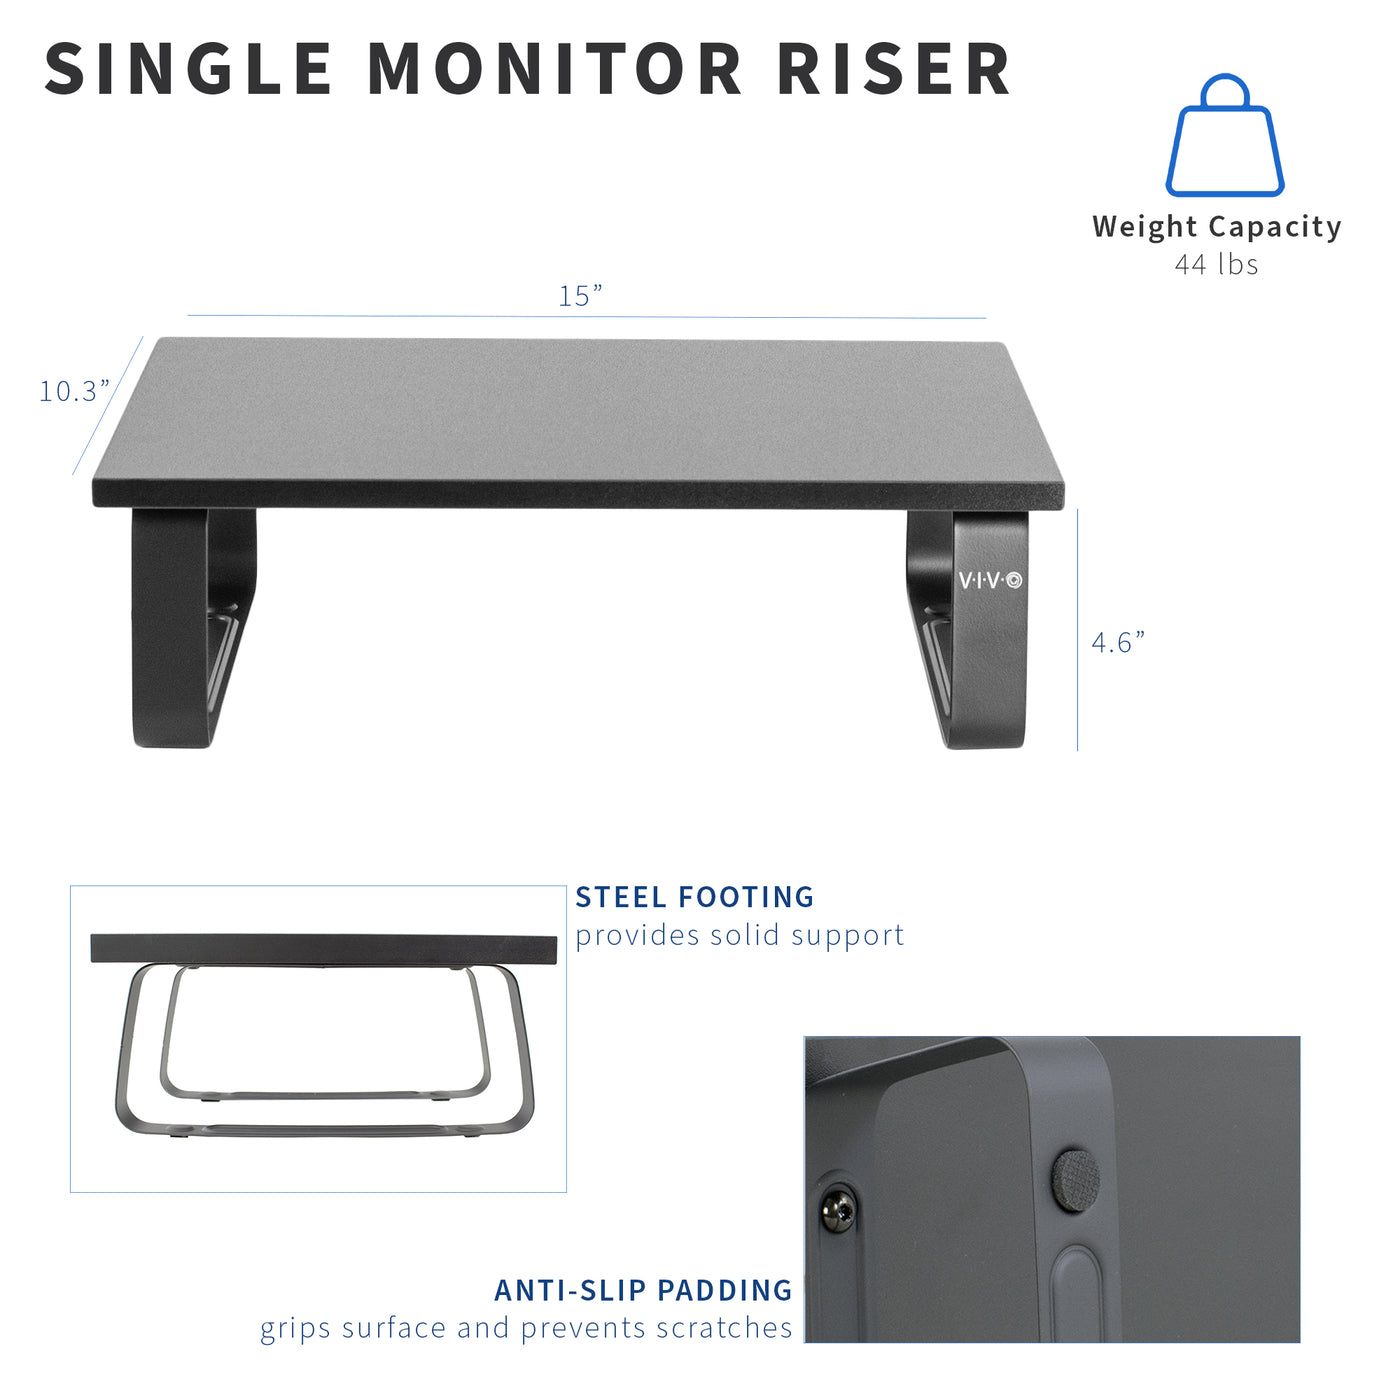 Sturdy tabletop riser for laptop or monitor for comfortable viewing.